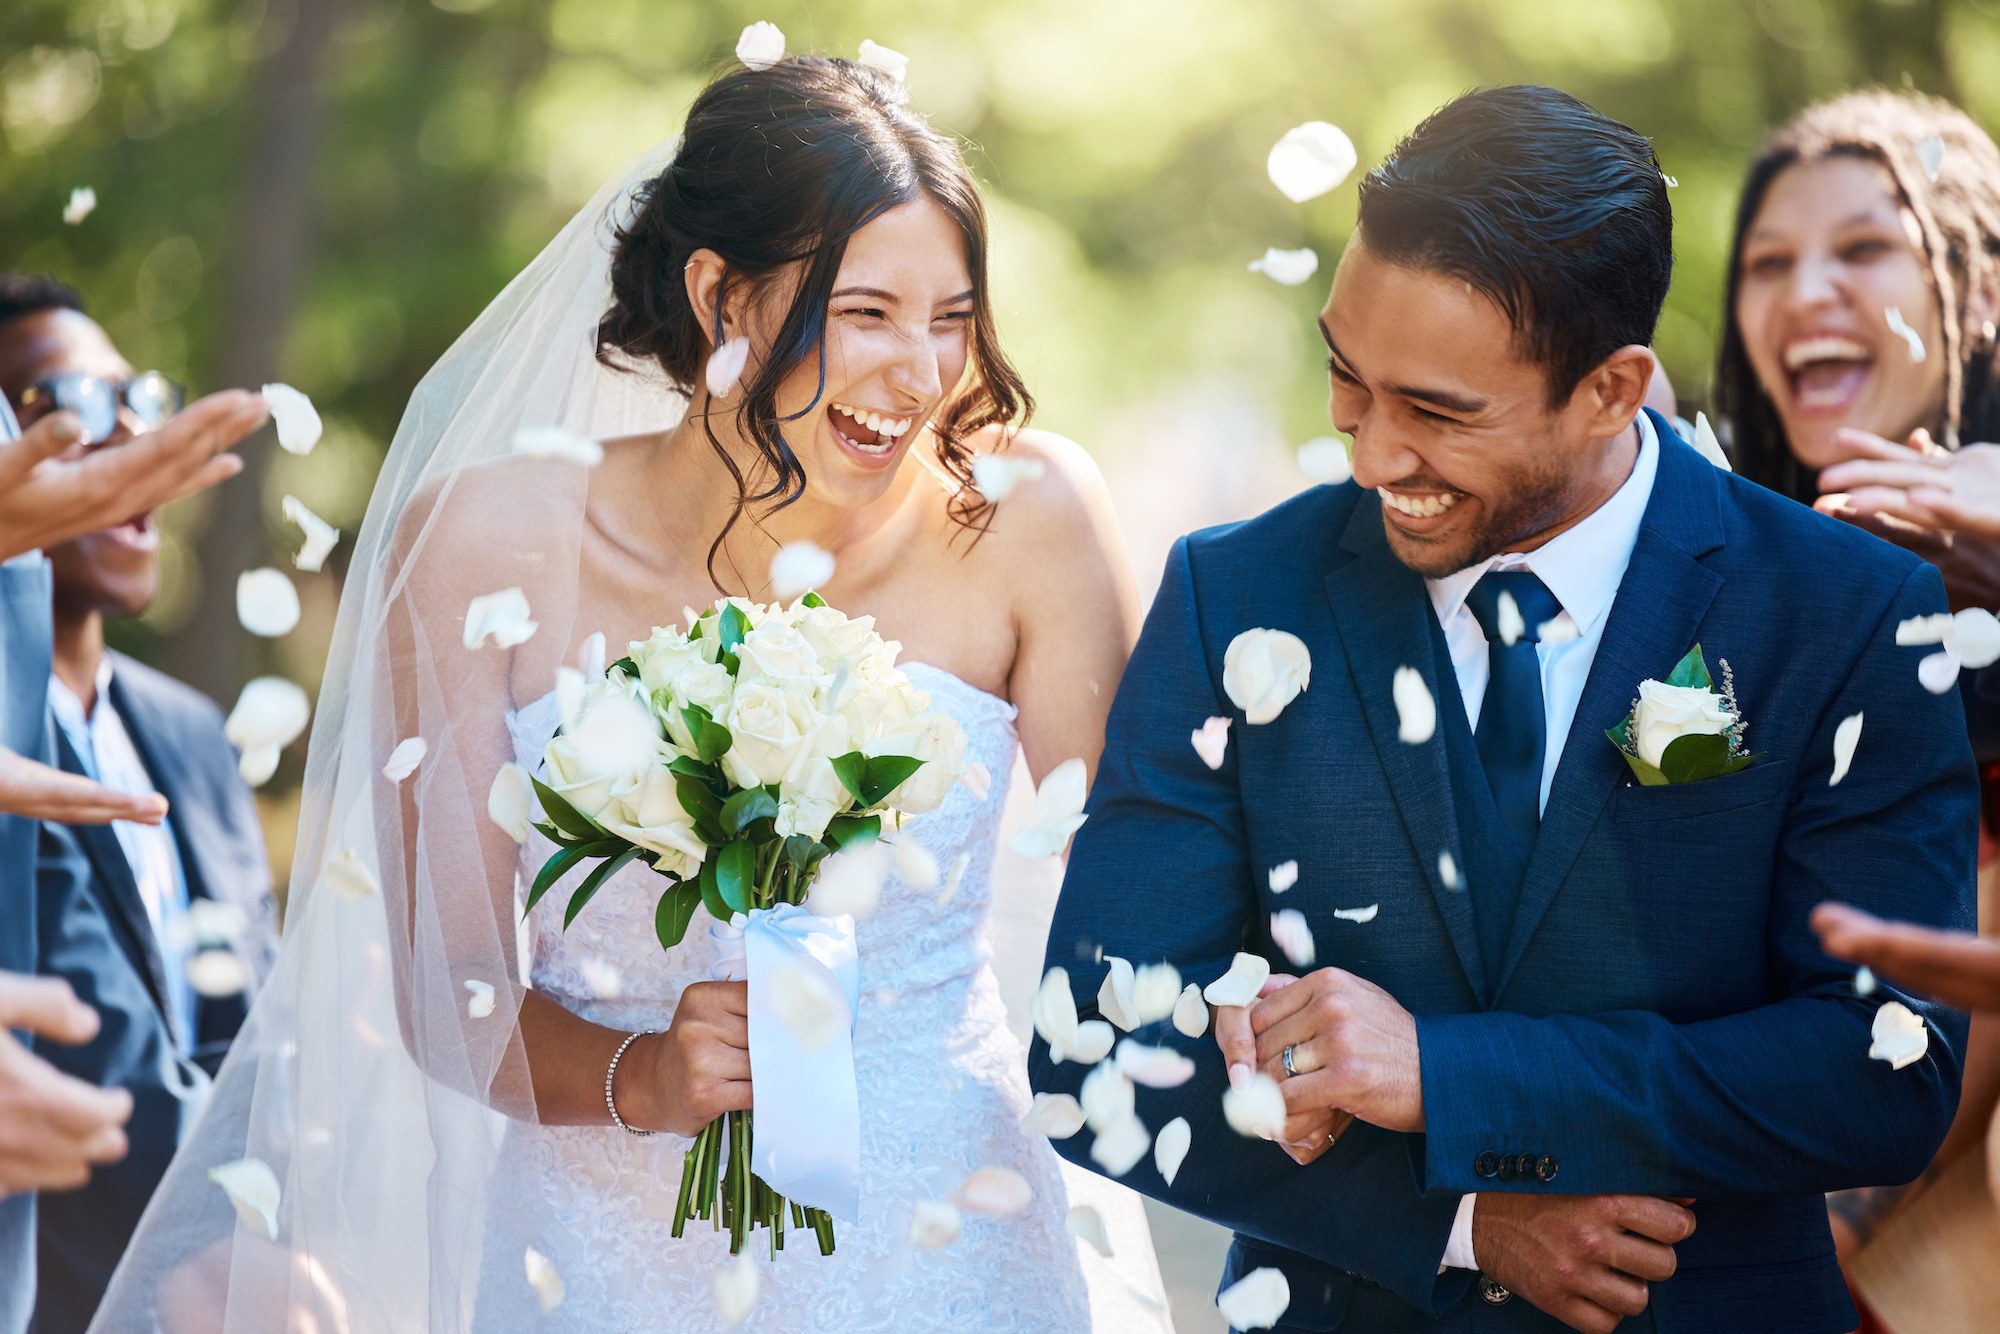 A bride and groom celebrating and smiling on their wedding day